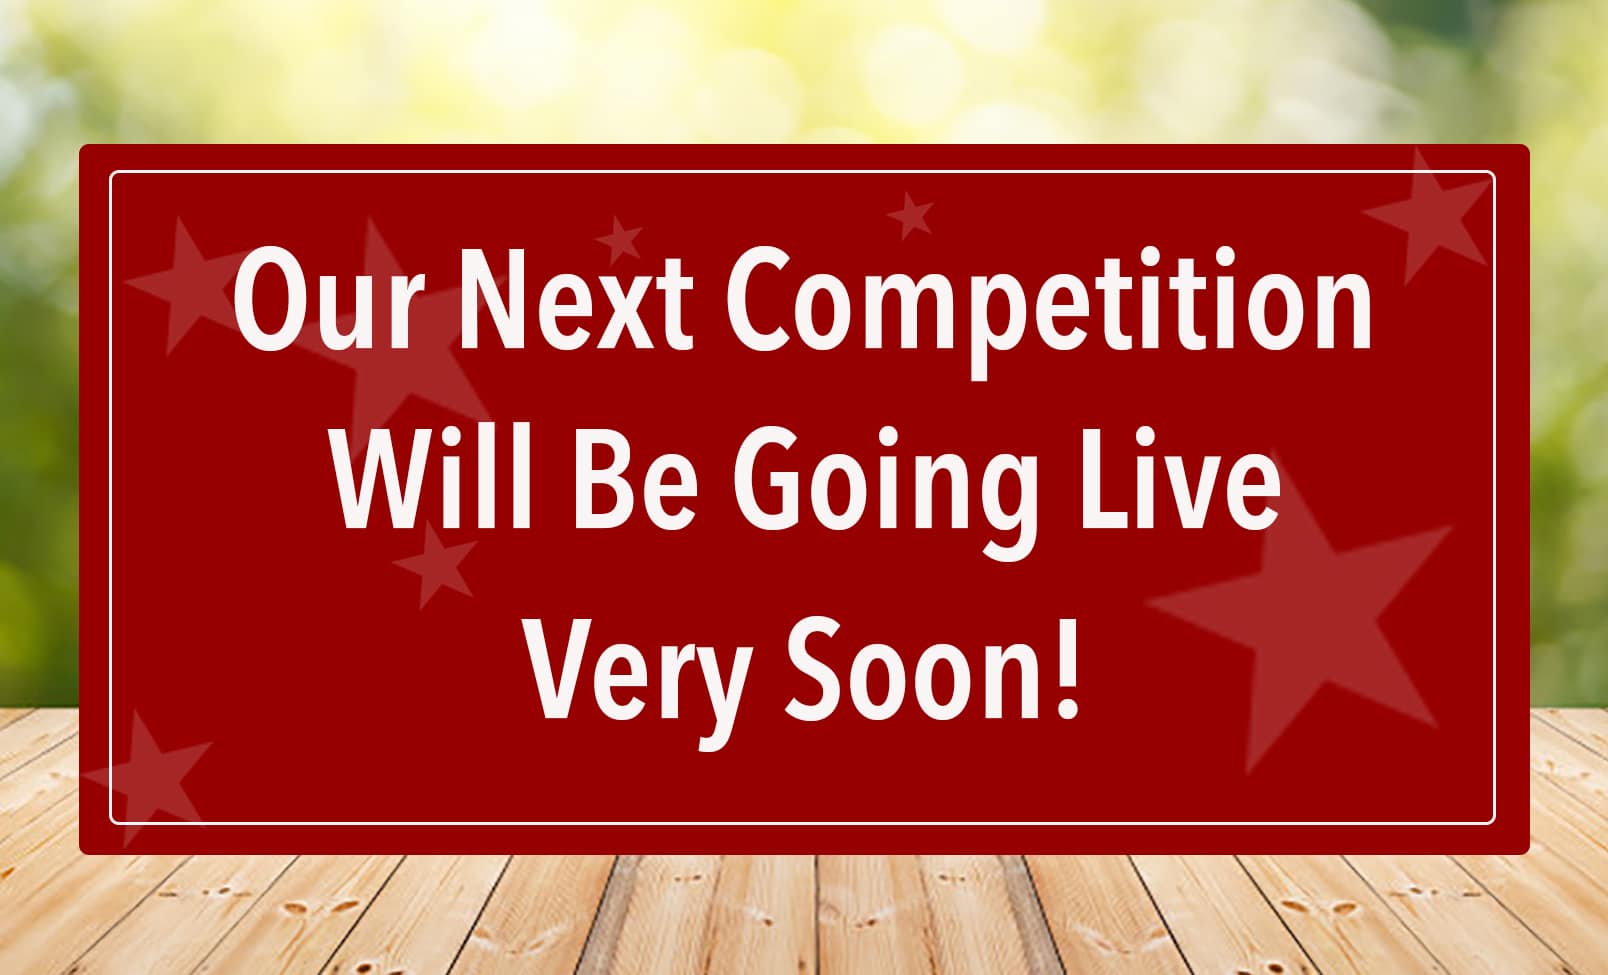 Our next competition will be going live very soon.